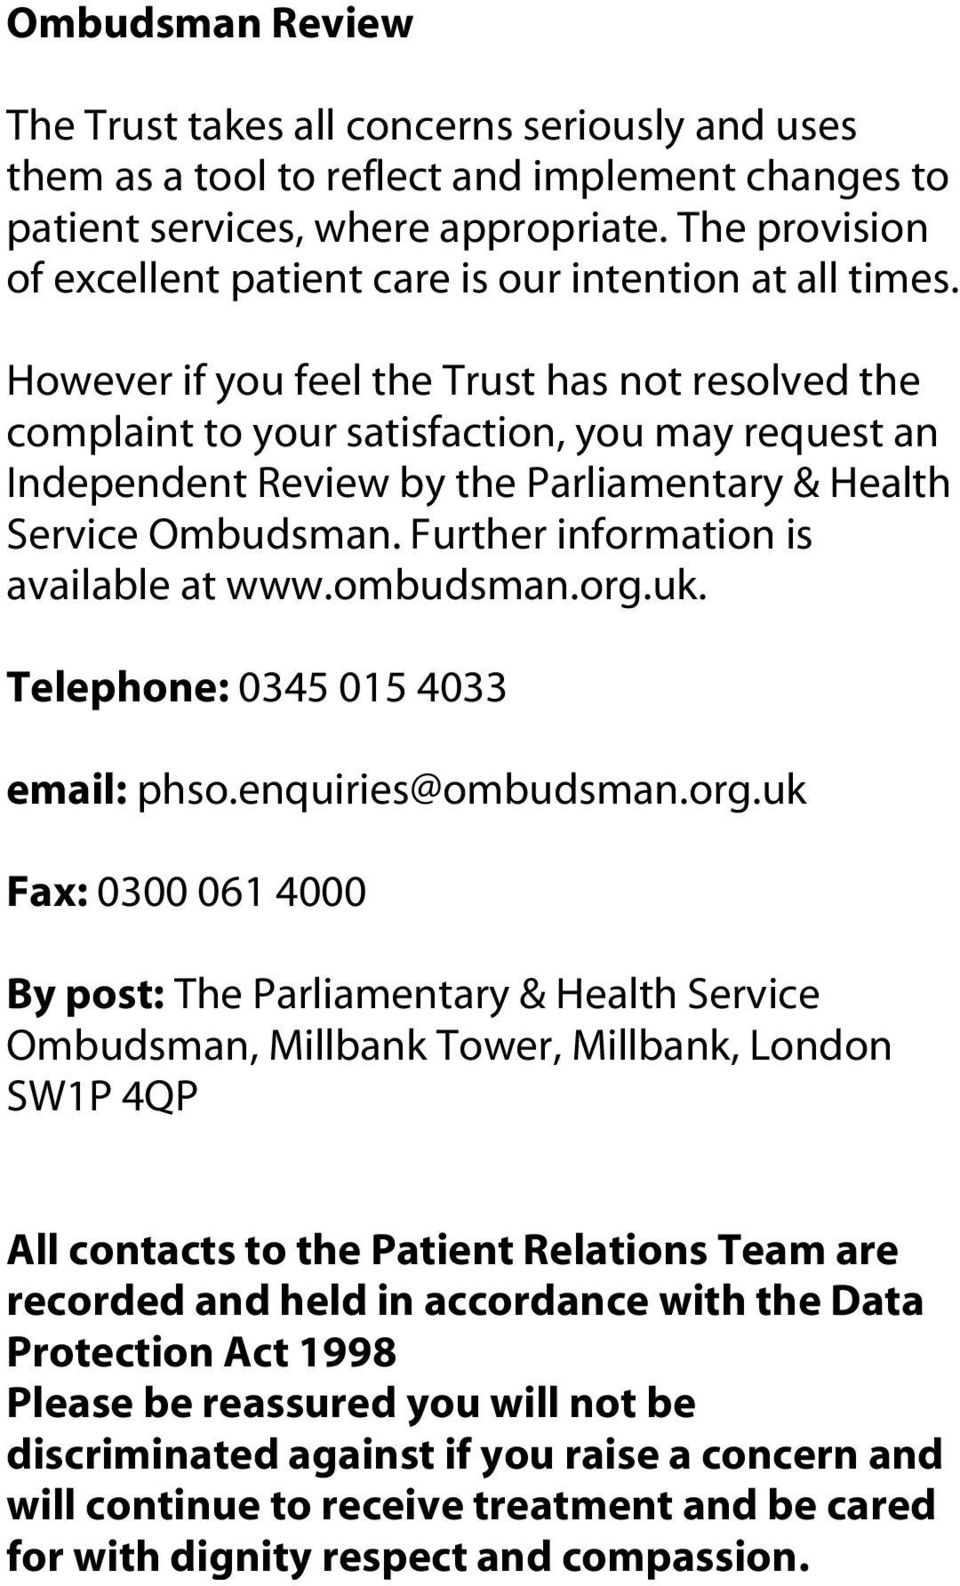 However if you feel the Trust has not resolved the complaint to your satisfaction, you may request an Independent Review by the Parliamentary & Health Service Ombudsman.